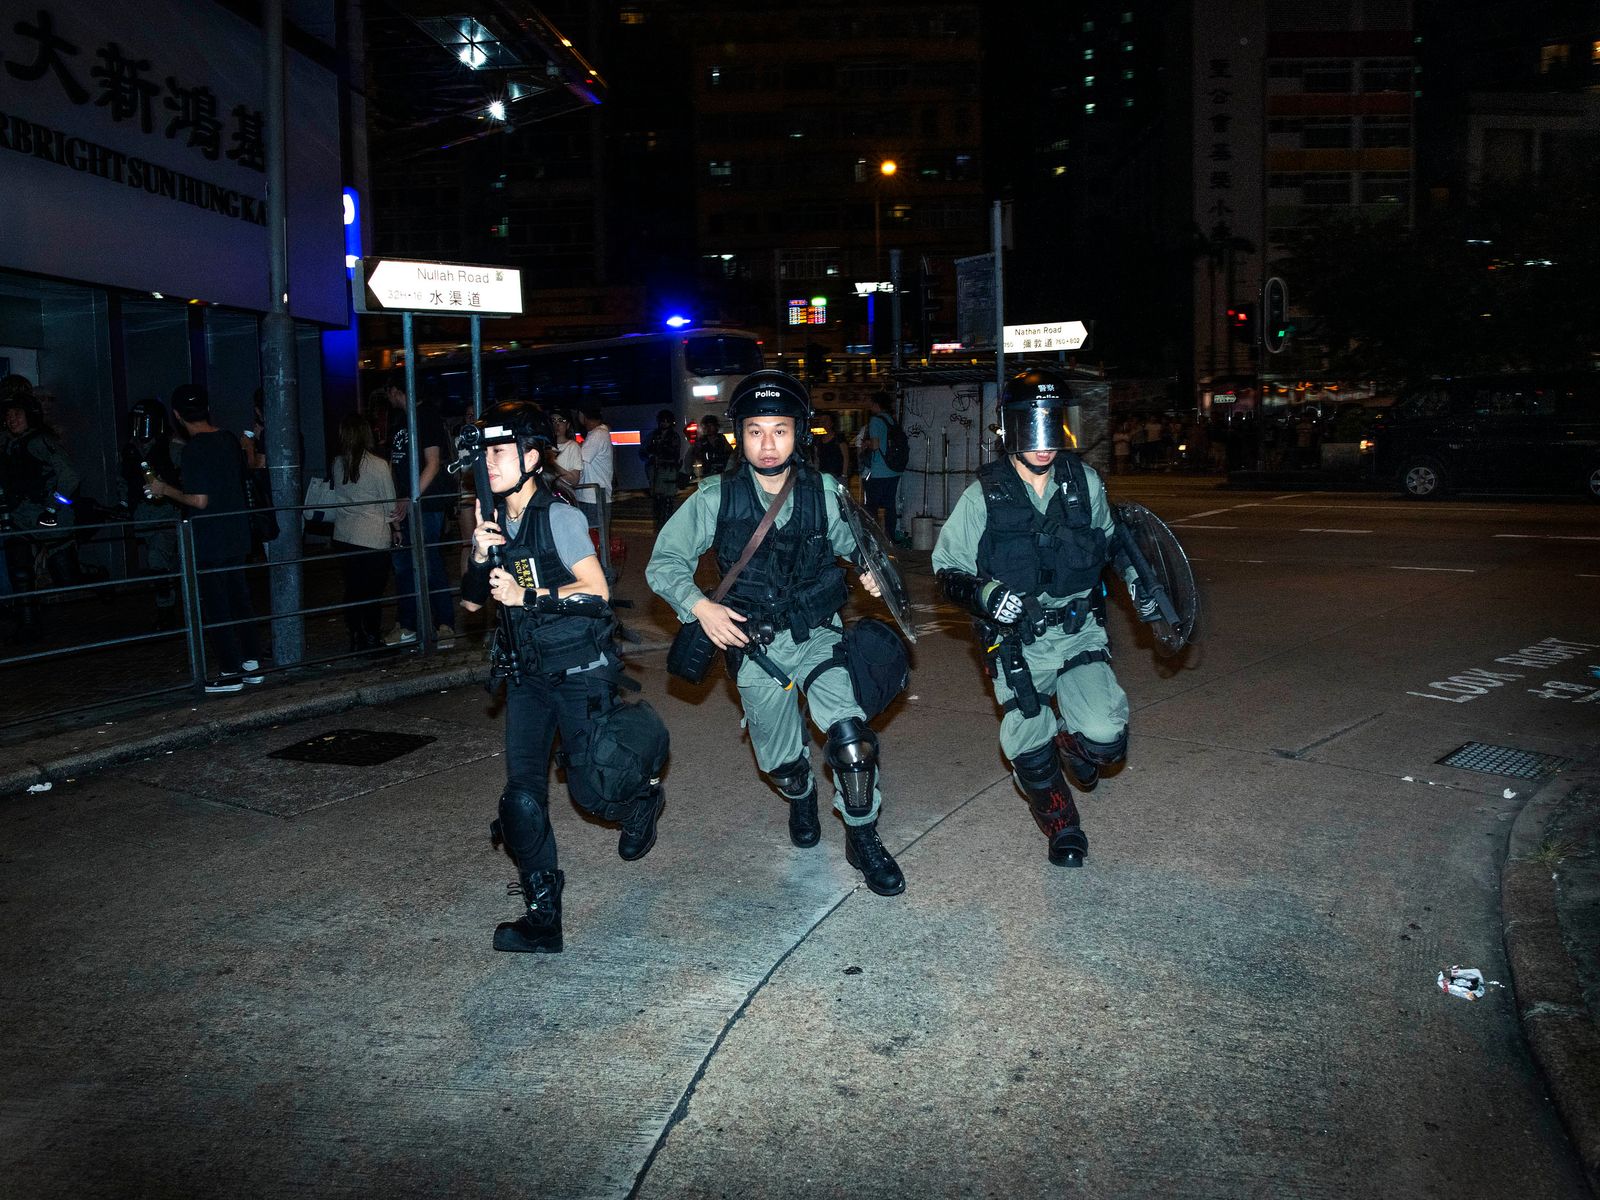 © Thaddé Comar - Run & Hit (Name of the tactic used by police during late night demonstrations. )